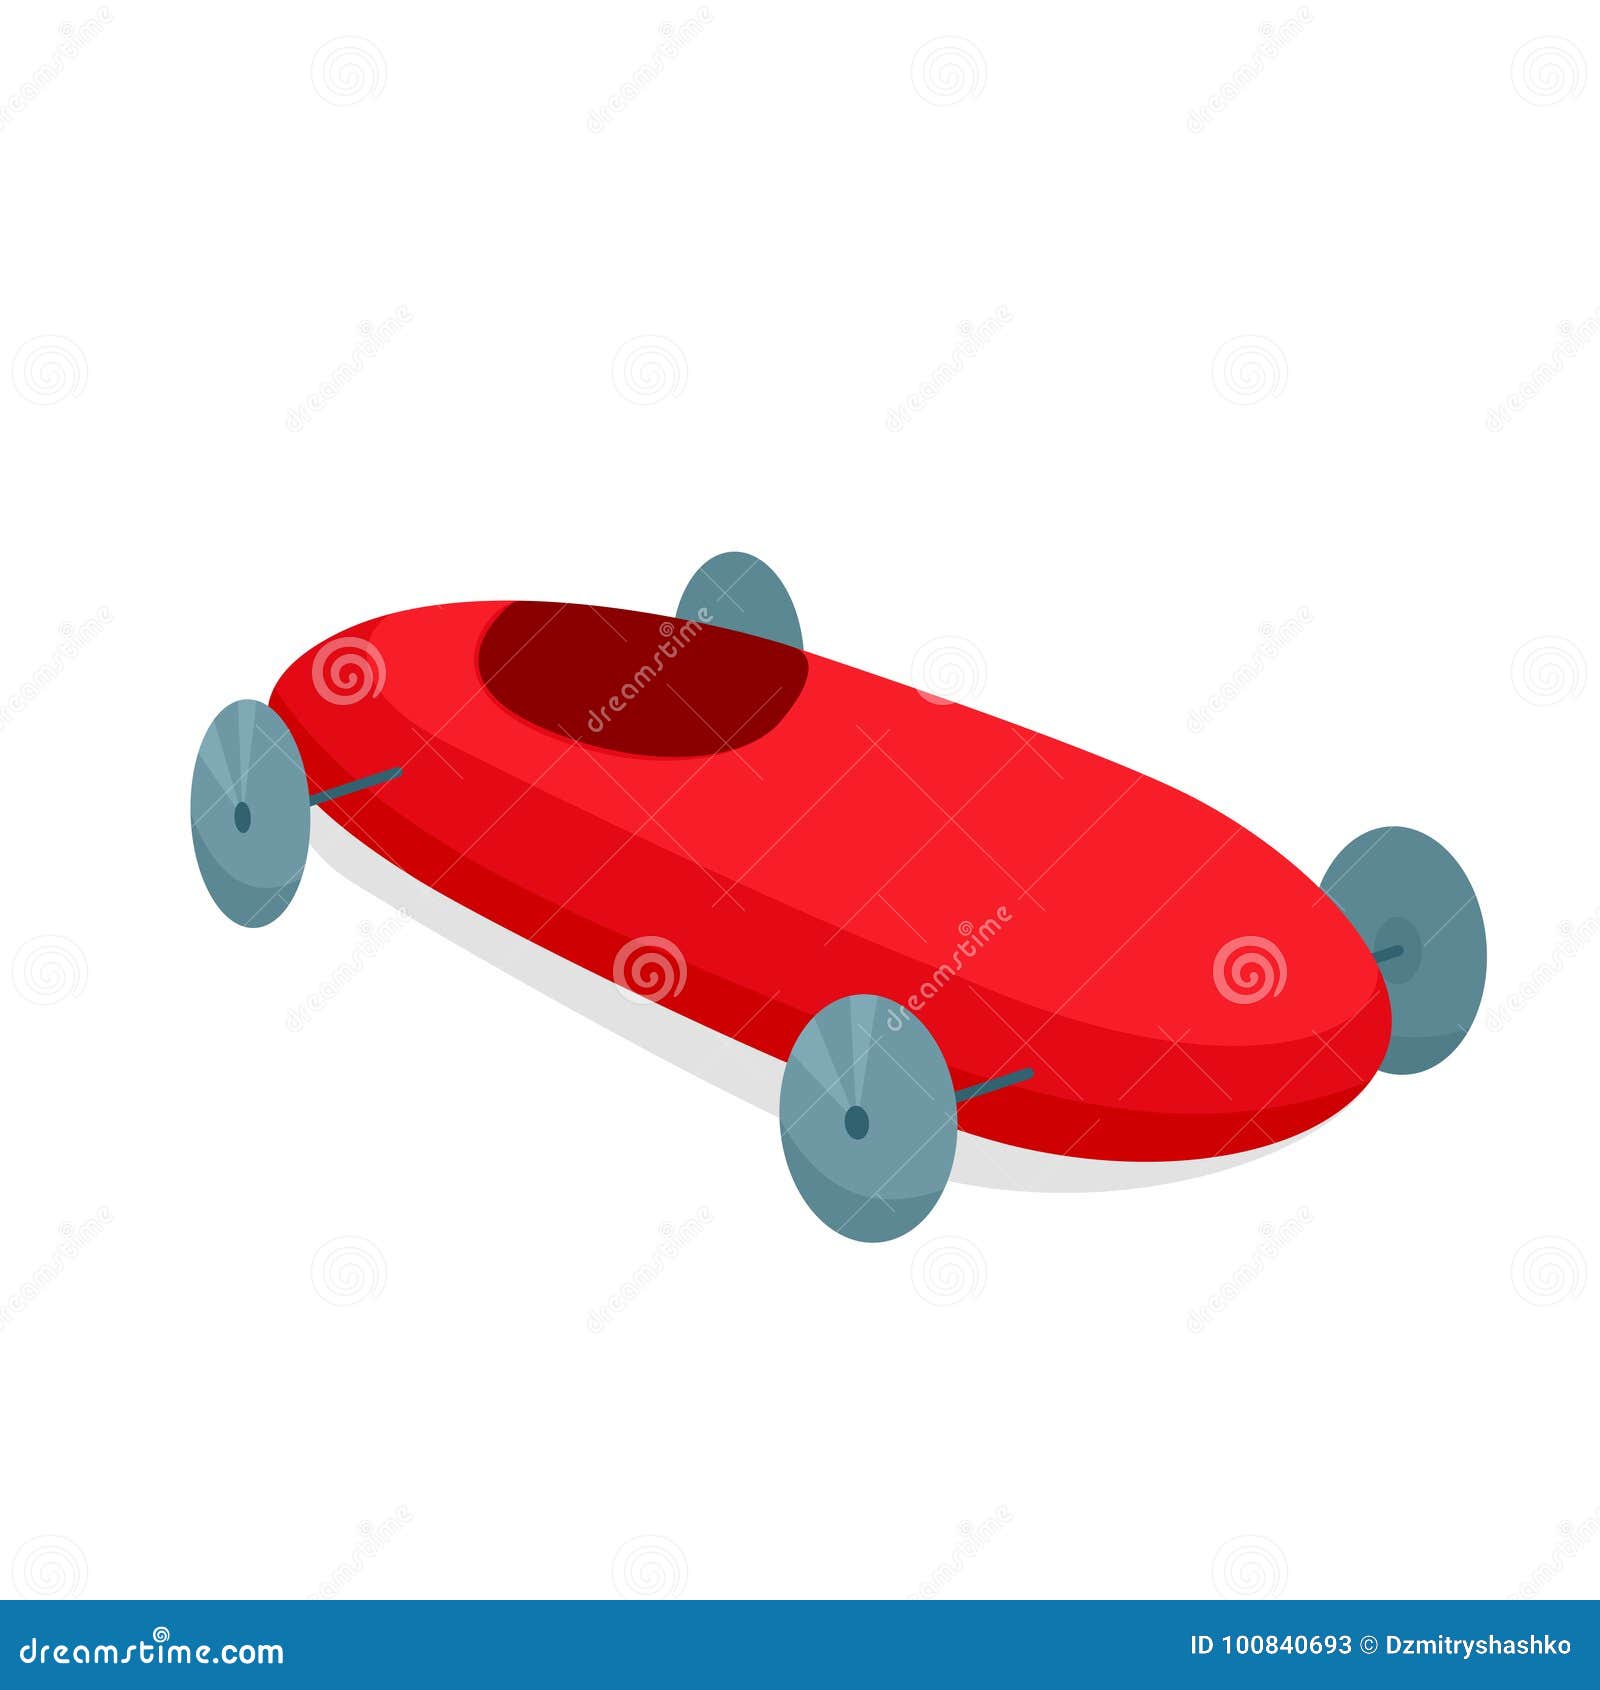 Soap box derby race with ducks cartoon character Vector Image